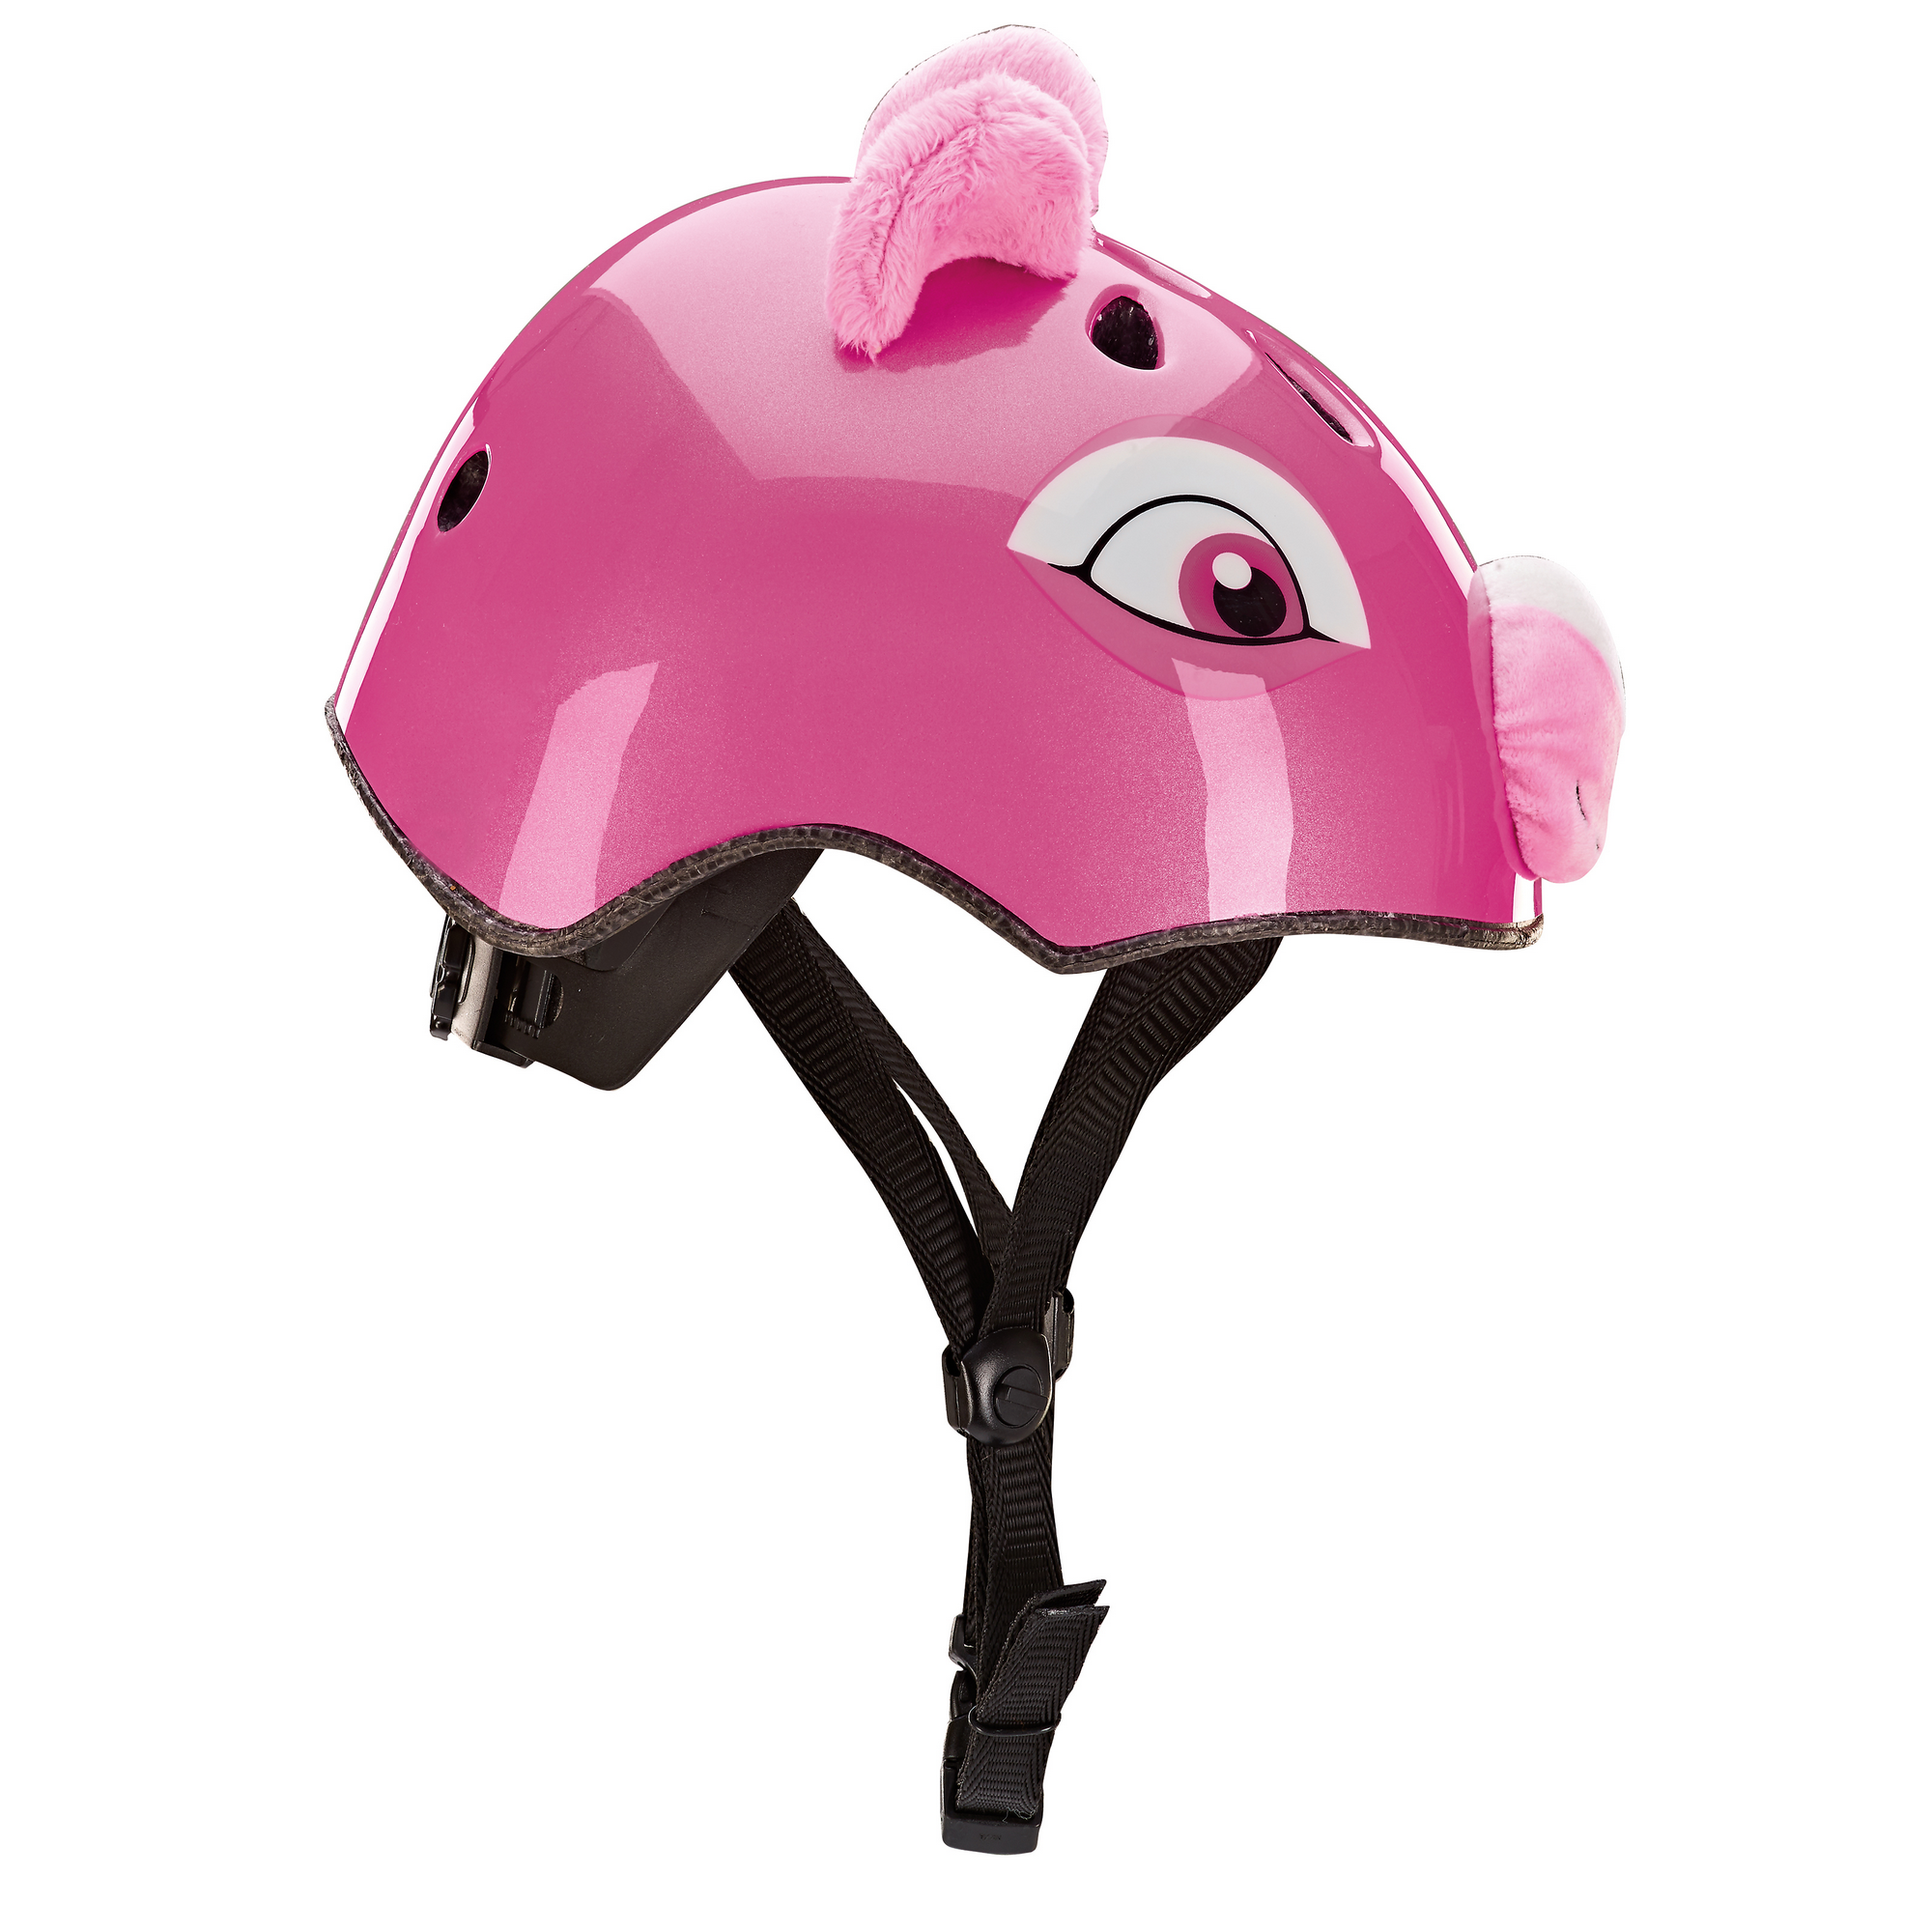 Fahrradhelm 'Bär' pink 50-54 cm + product picture